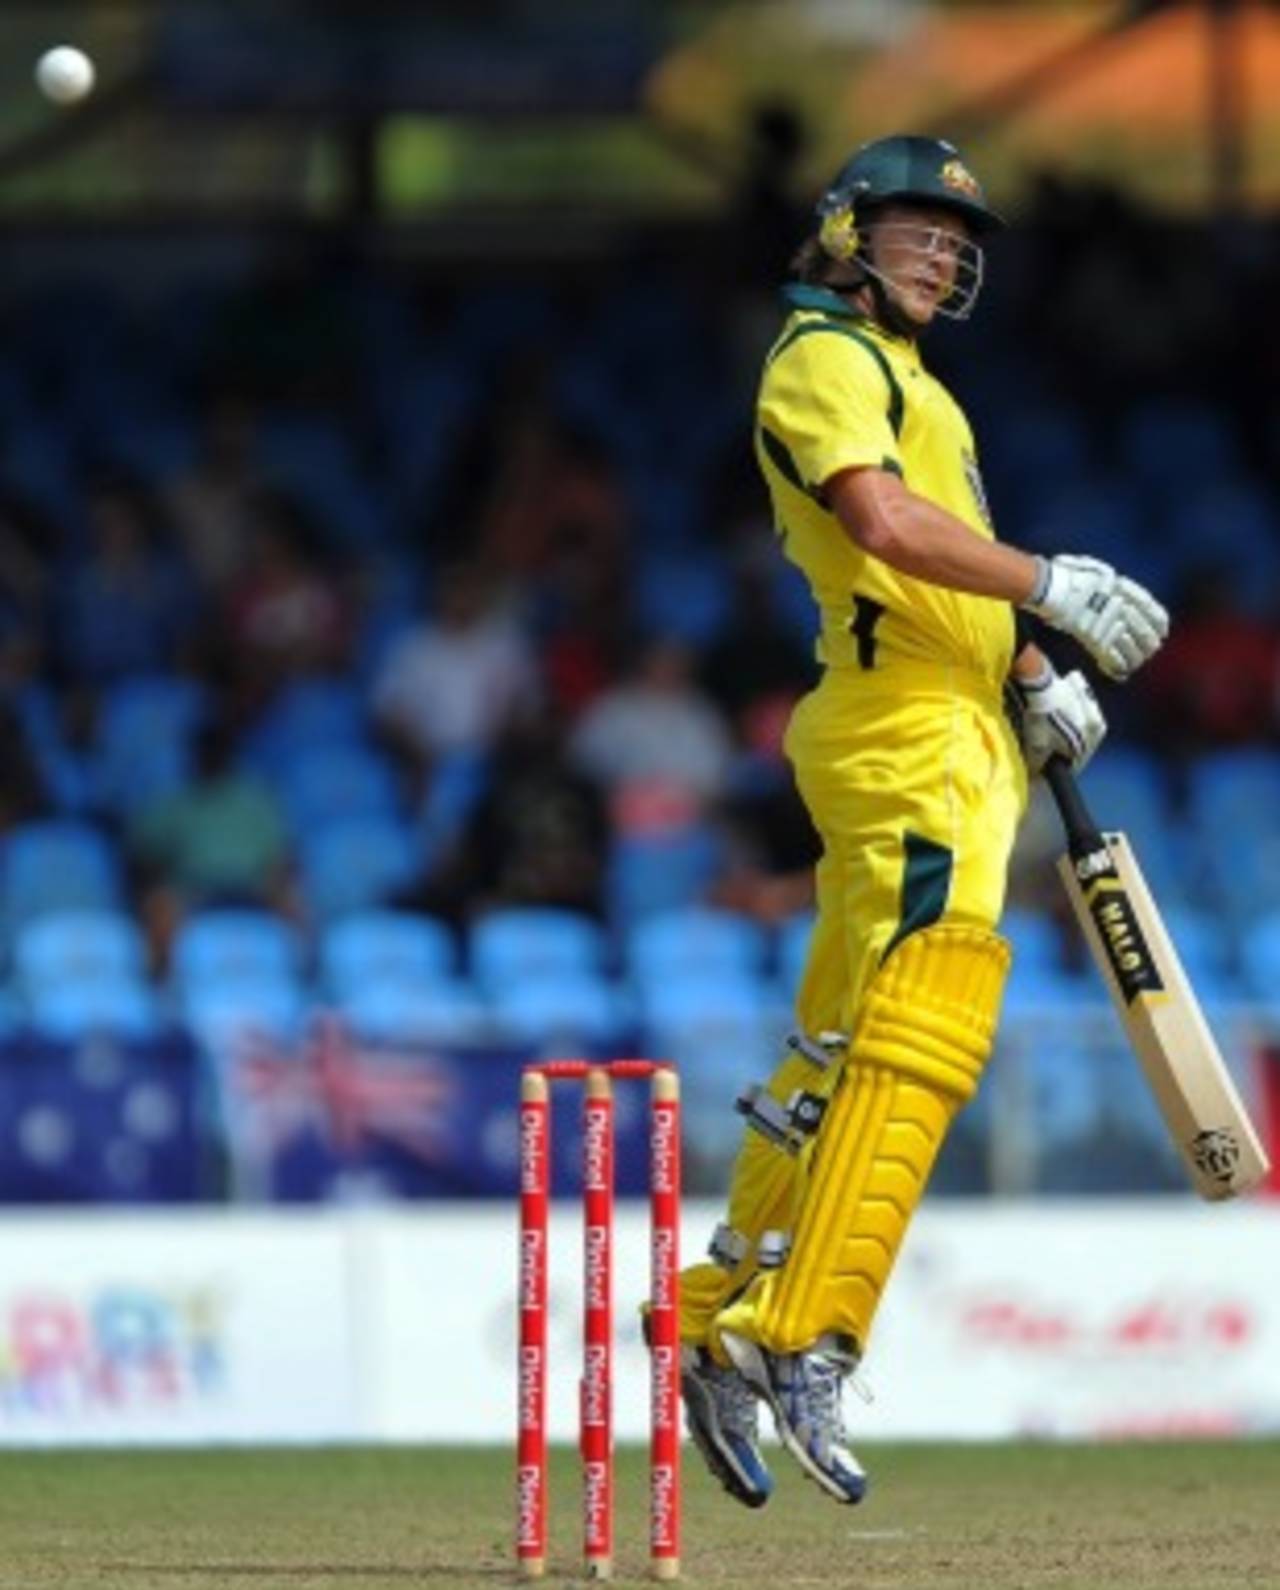 Shane Watson jumps to avoid a bouncer, West Indies v Australia, 1st ODI, St Vincent, March 16, 2012